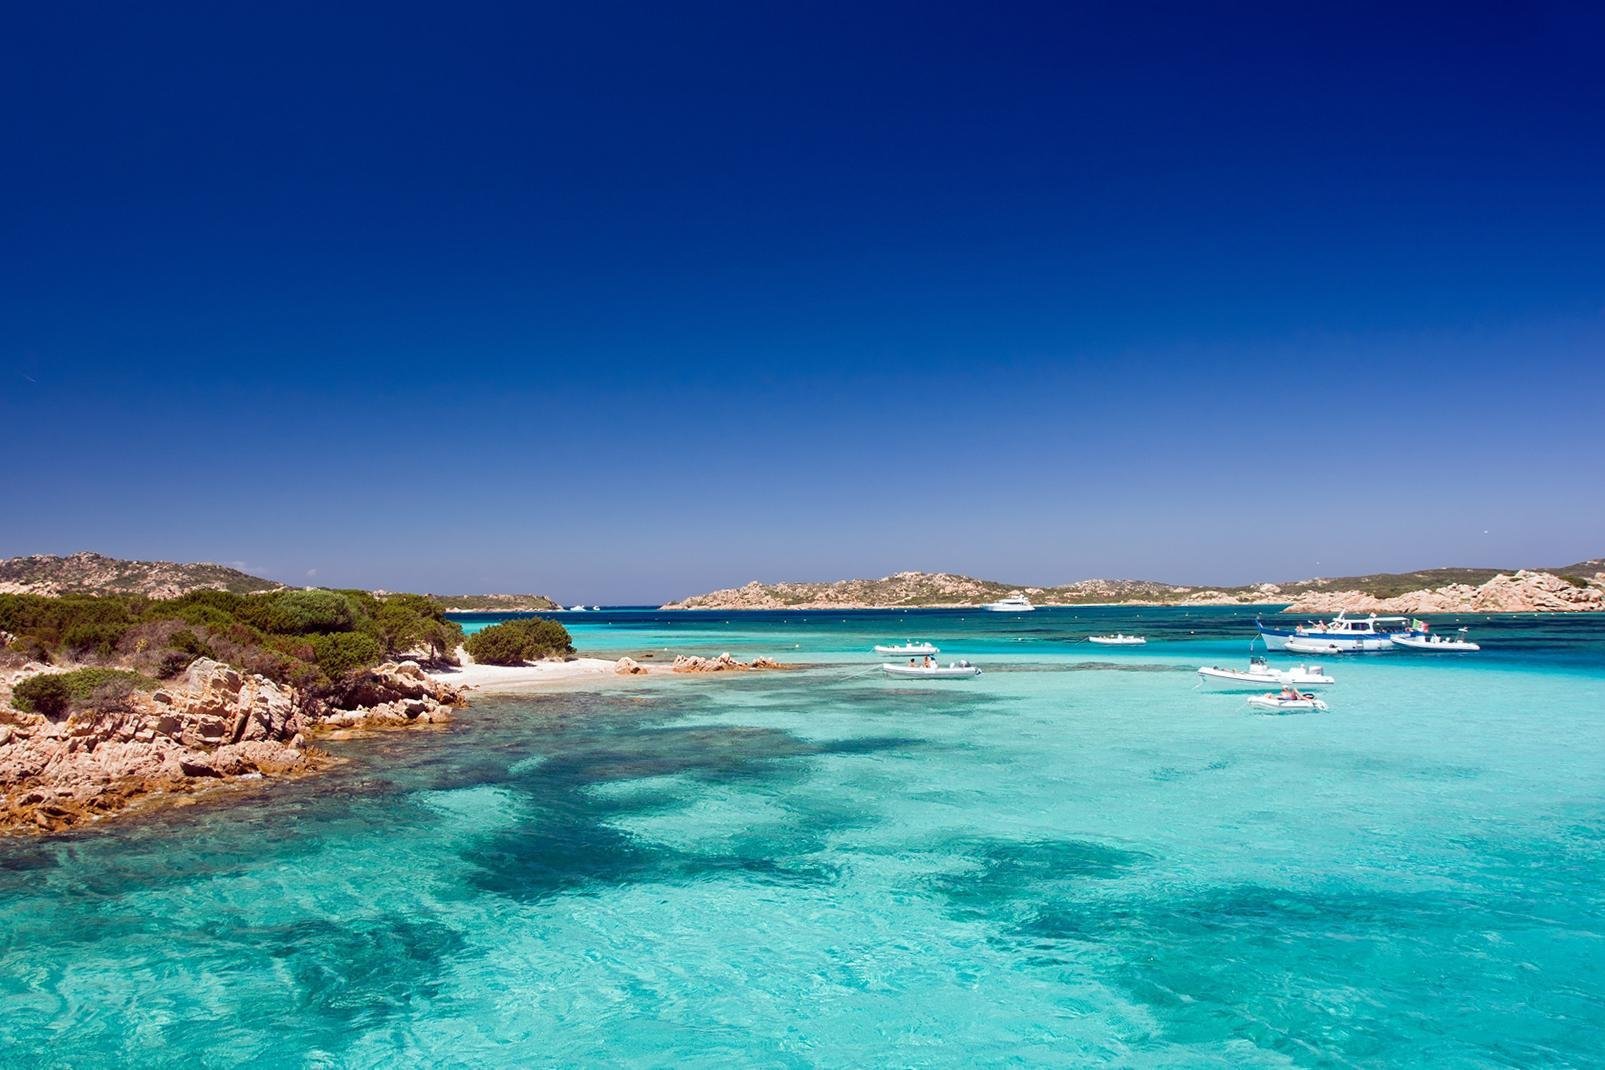 To the north-west of Sardinia, opposite the famous Costa Smeralda, an archipelago named Maddalena stretches out across a protected area of 12,000 ha. Classed as a national park since 1994 the seven islands (Maddalena, Caprera, Spargi, San Stefano, Budelli, Razzioli and Santa Maria) and numerous islets are usually visited by tourists during a day's excursion. The granite rocks and white sand beaches ...